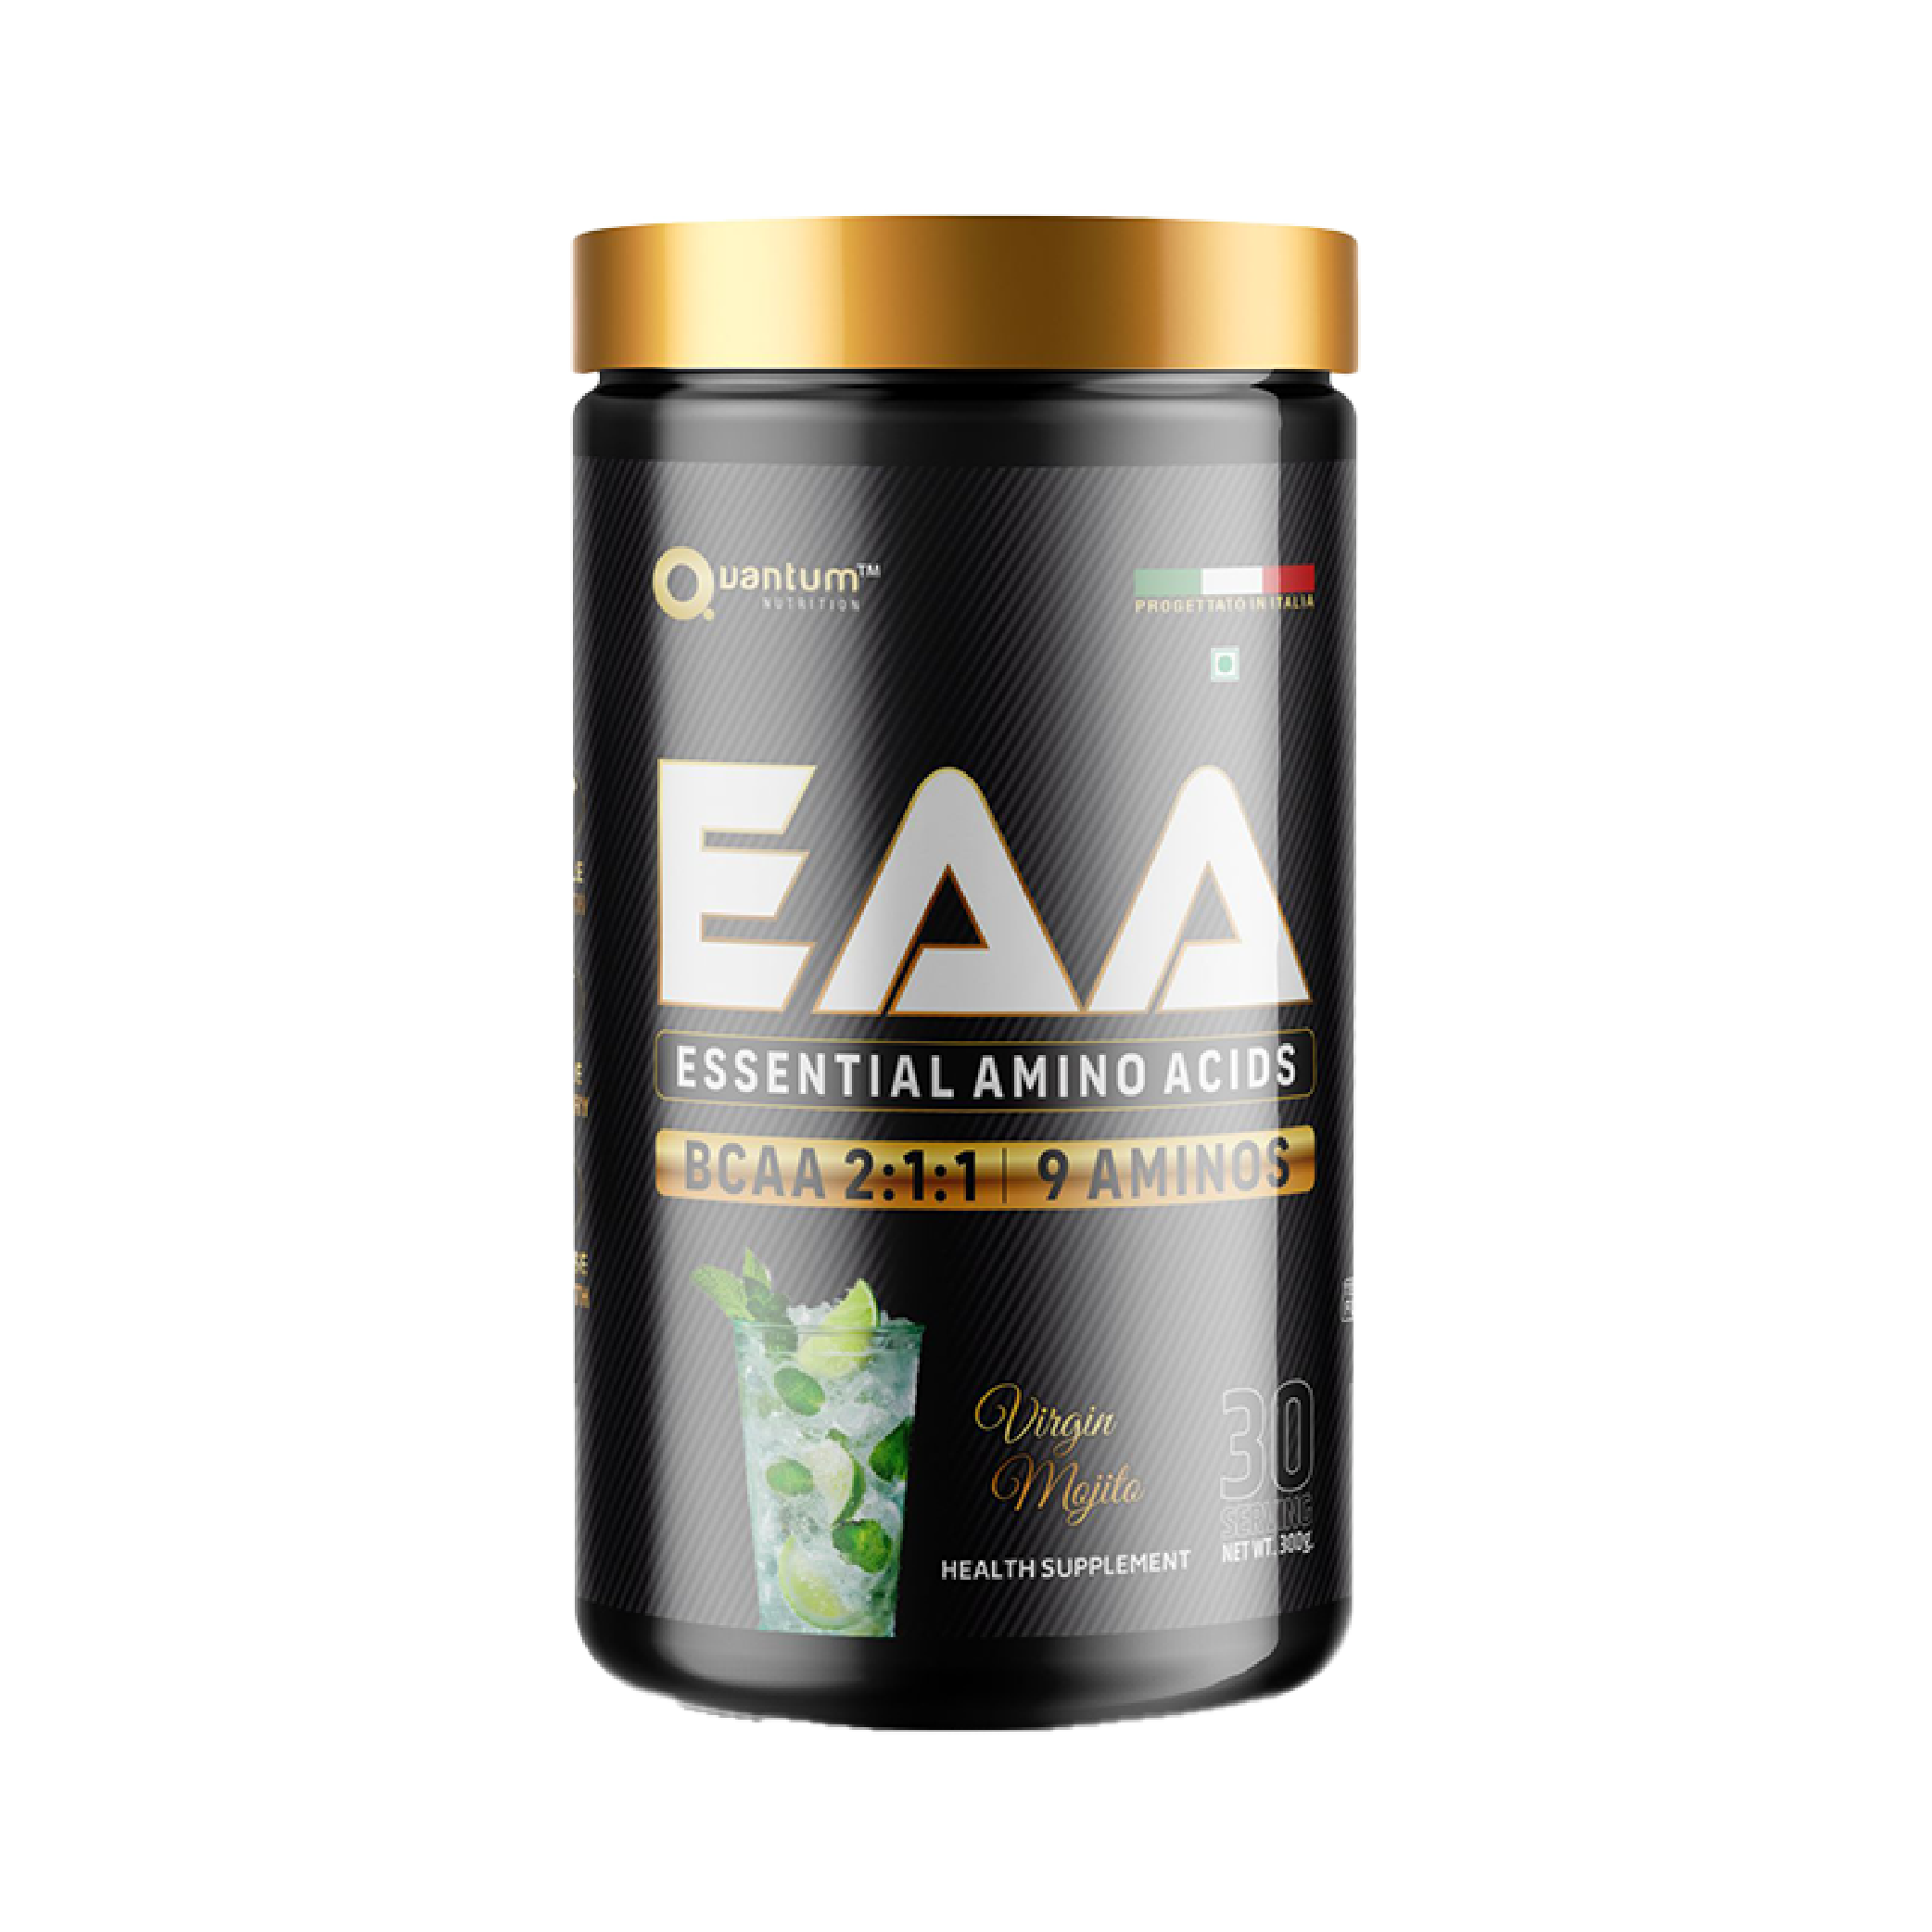 Quantum Nutrition's EAA with BCAA 2:1:1 in Virgin Mojito flavour. 10g of pure essential amino acids with best flavour